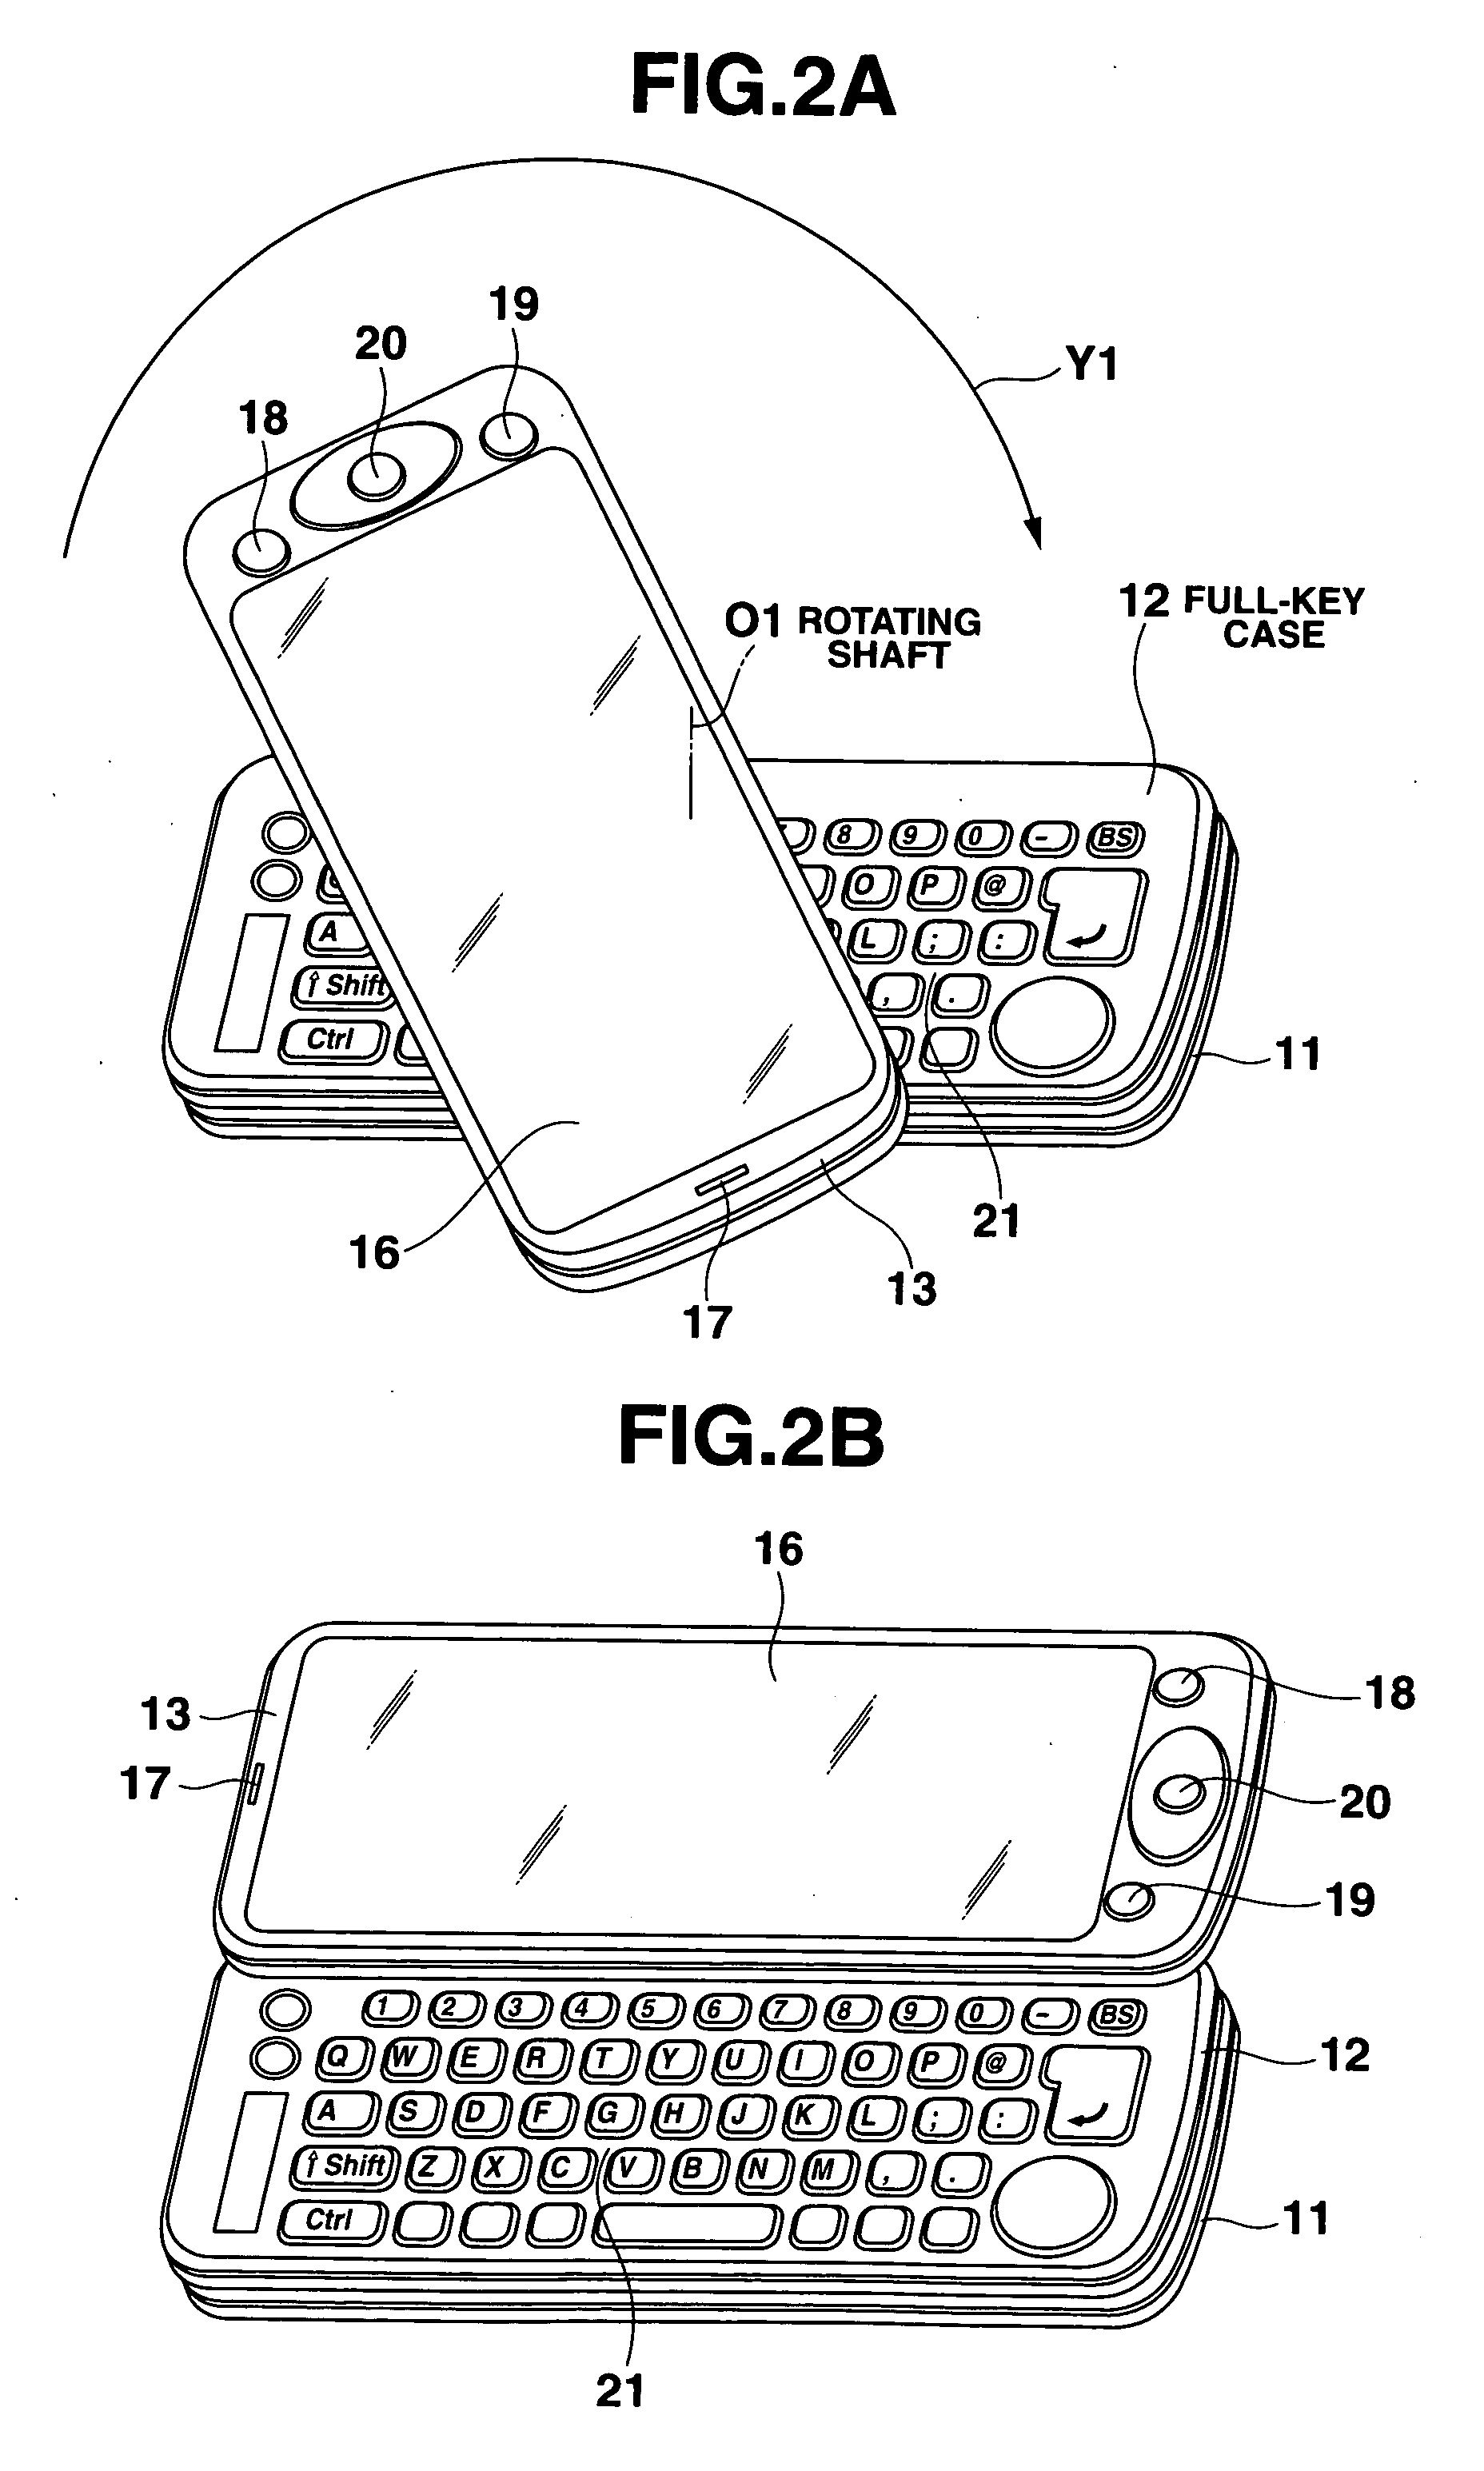 Cellular phone apparatus with keyboard